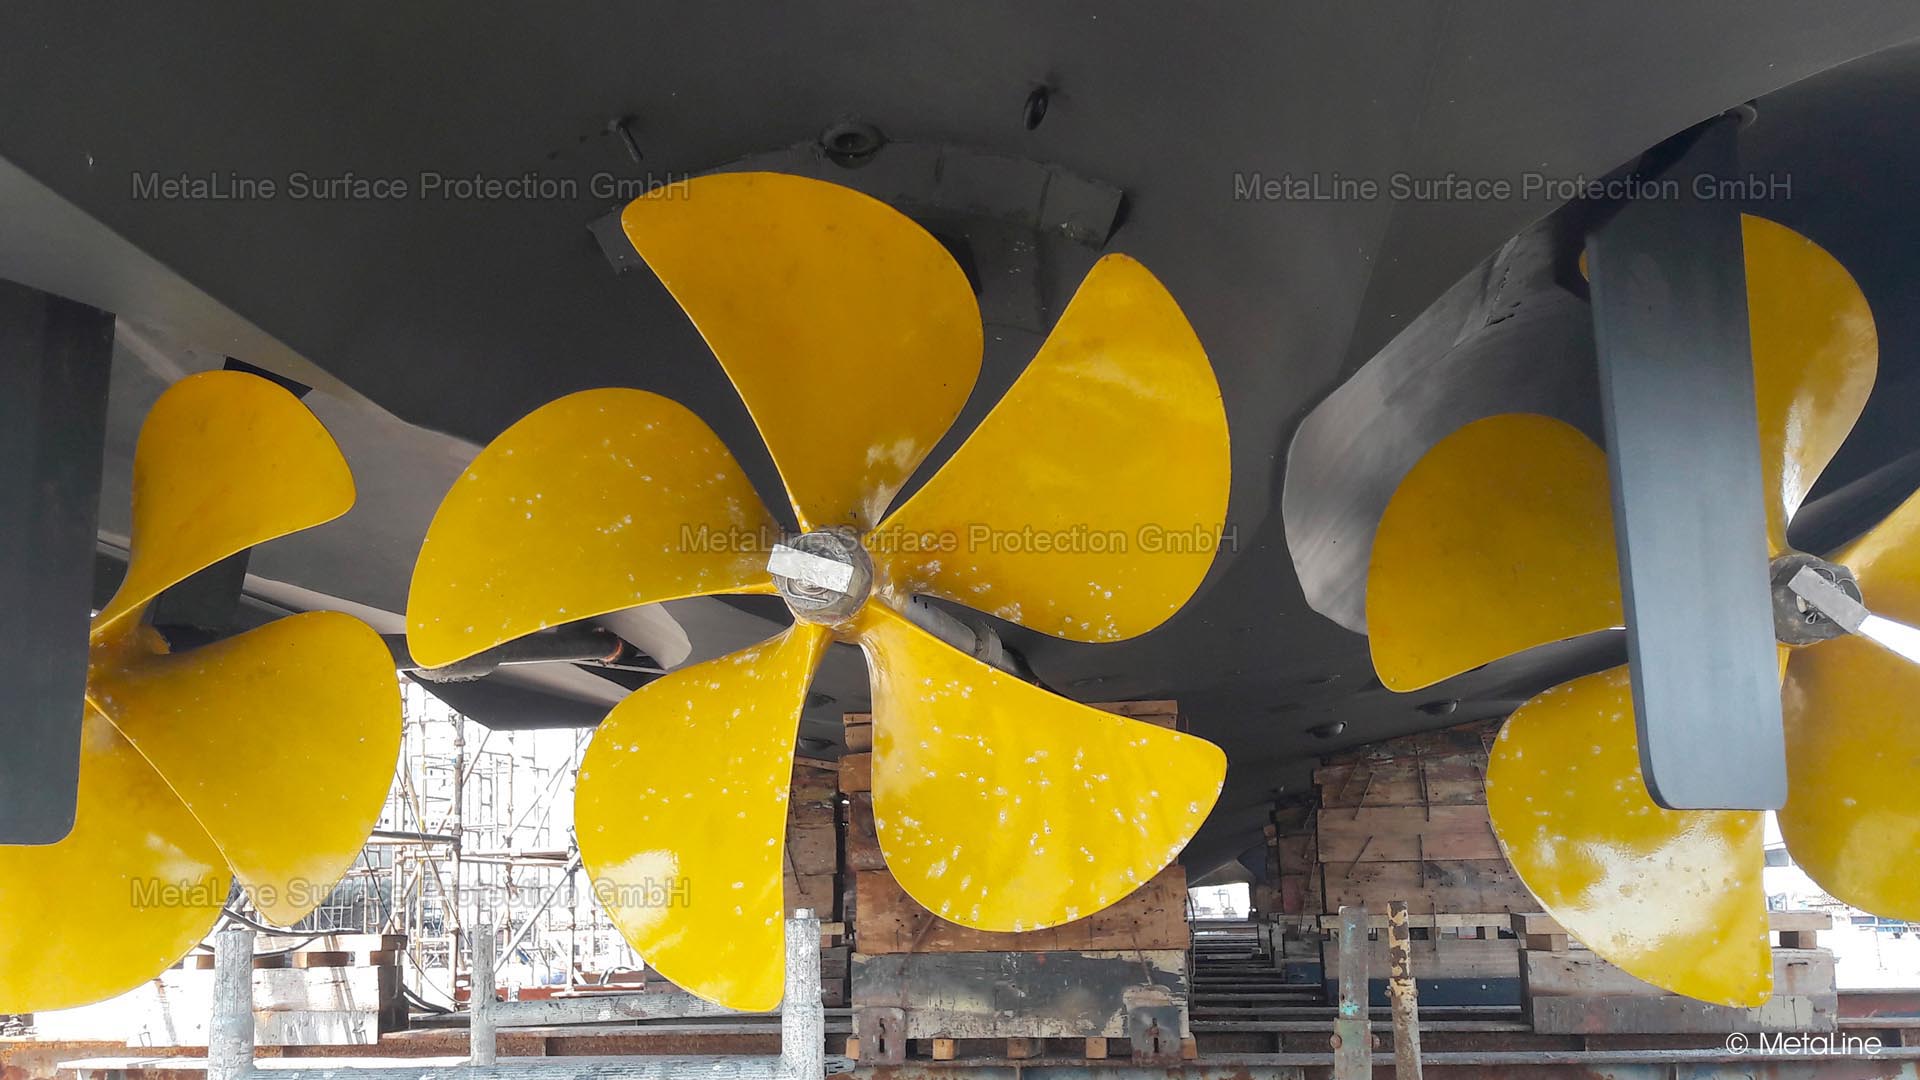 <!-- START: ConditionalContent --><!-- END: ConditionalContent -->   <!-- START: ConditionalContent --> Propeller; Coating; Anti-Fouling; Cavitation; Signature; Modification; Antifouling; Protection, Erosion, Wear, Bio-Corrosion <!-- END: ConditionalContent -->   <!-- START: ConditionalContent --><!-- END: ConditionalContent -->   <!-- START: ConditionalContent --><!-- END: ConditionalContent -->